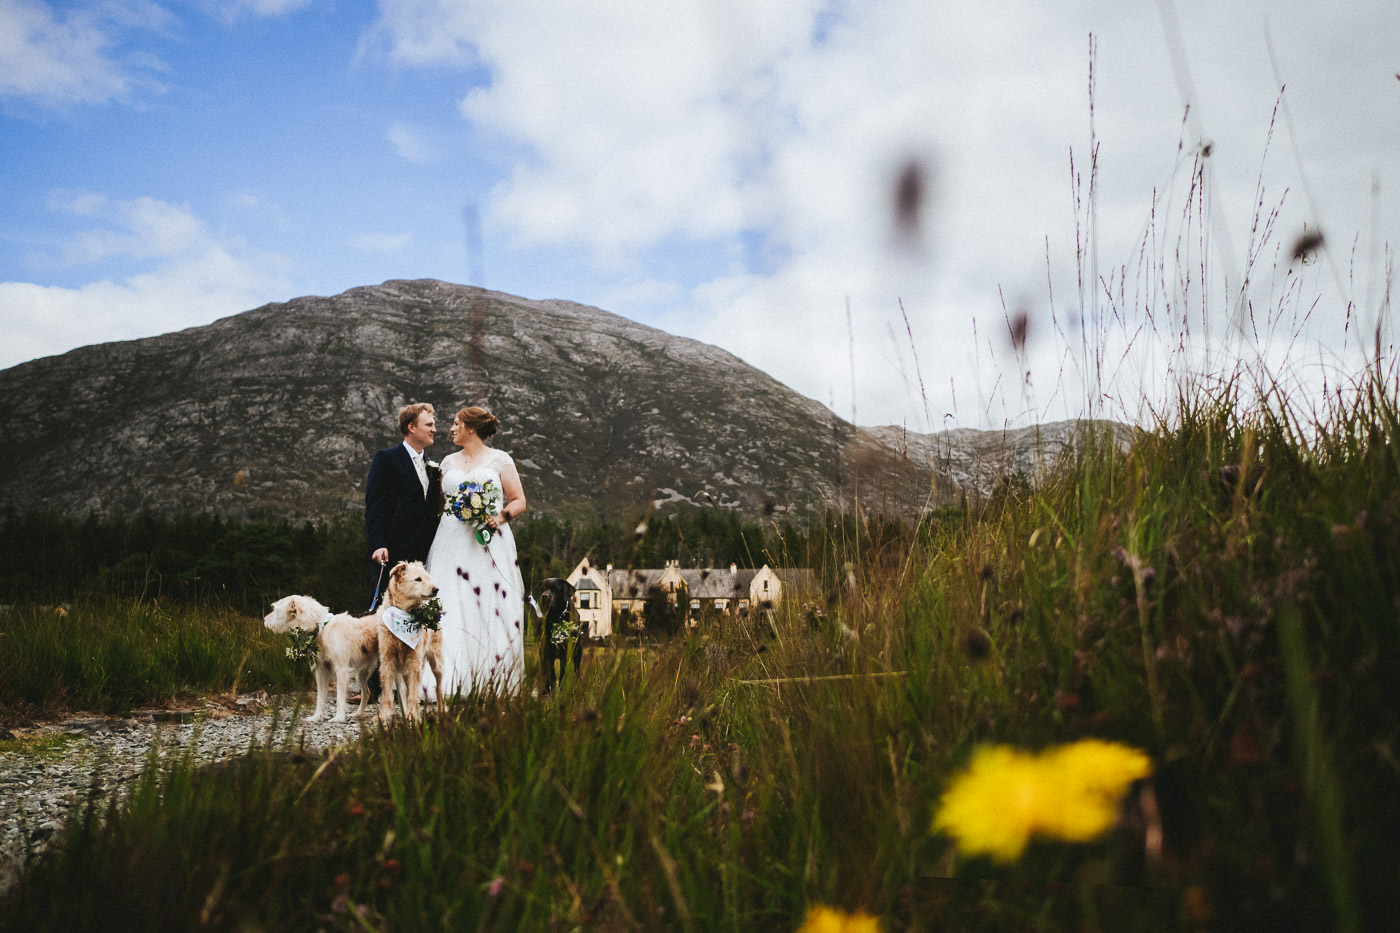 Getting married in Ireland, bride and groom at Lough Inagh in Connemara, with Lough Inagh Lodge and mountains in the background - wedding photographer Ireland Brautrausch